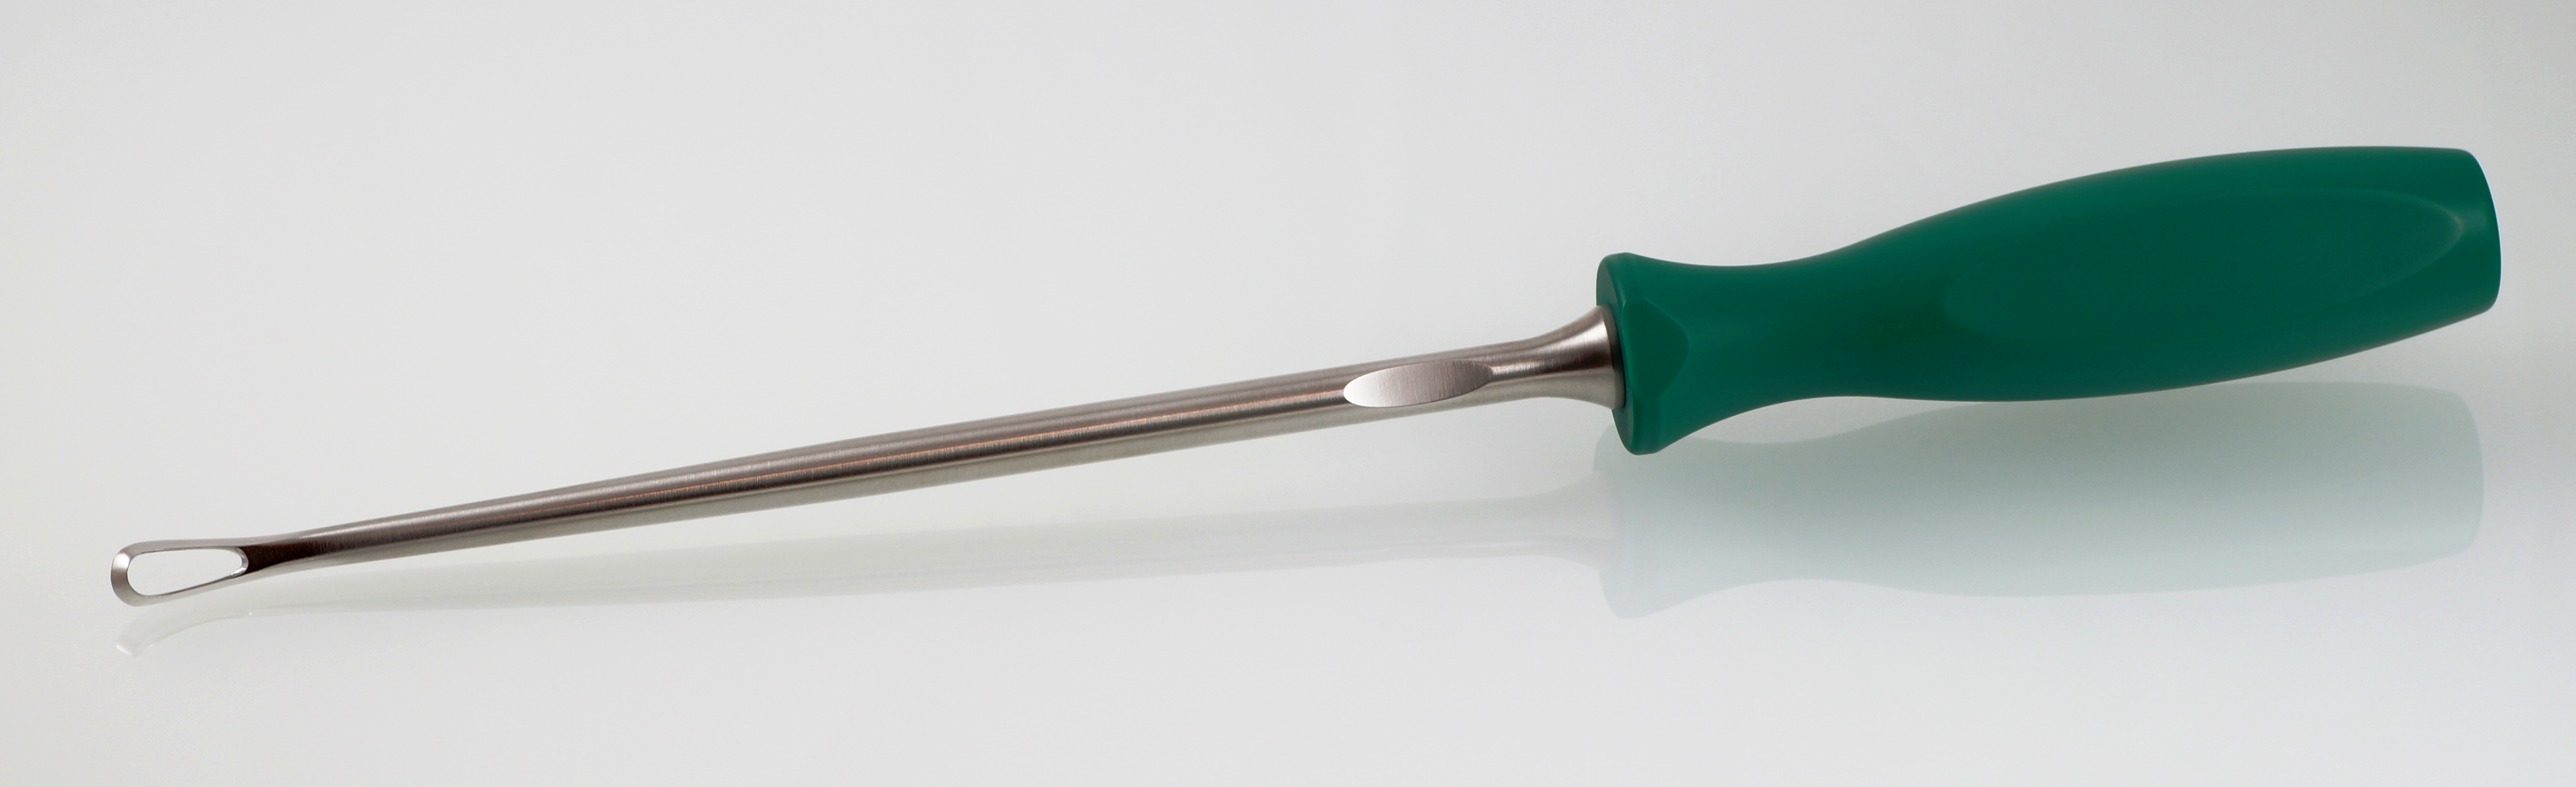 surgical curette with green ergonomic handle